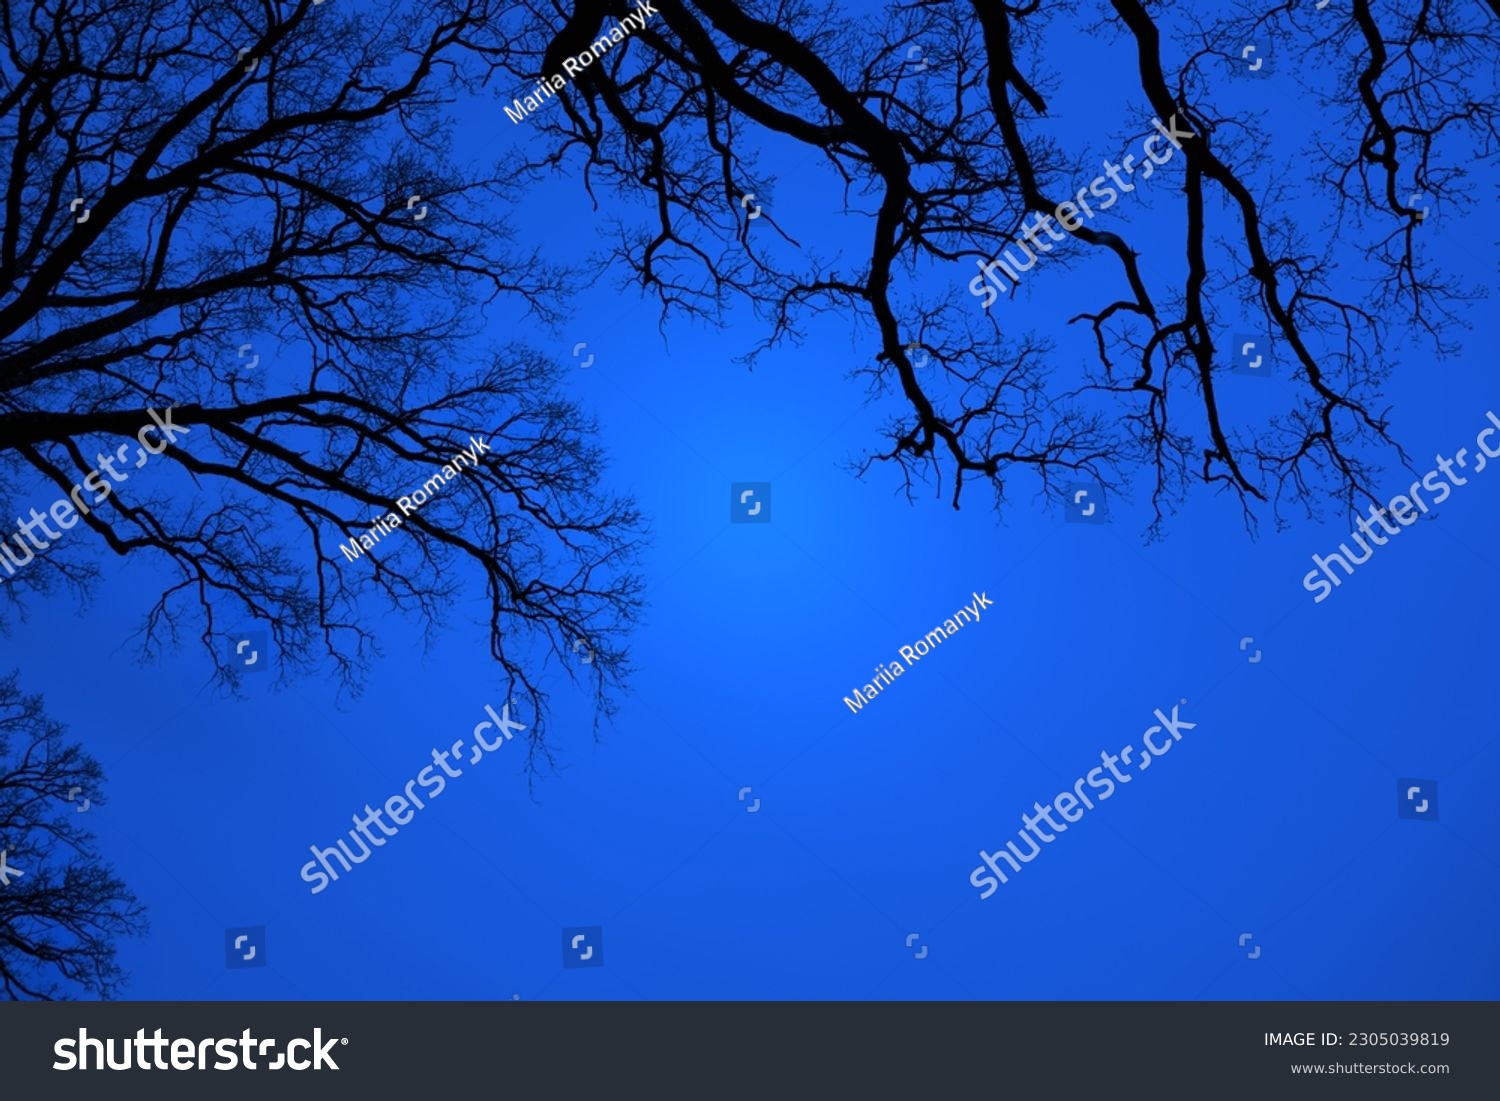 Leafless Oak tree branches silhouette. Black and blue. Natural oak tree branches silhouette on a blue background. Silhouettes of a dark gloomy forest with textured trees. Gothic background. Darkness #2305039819